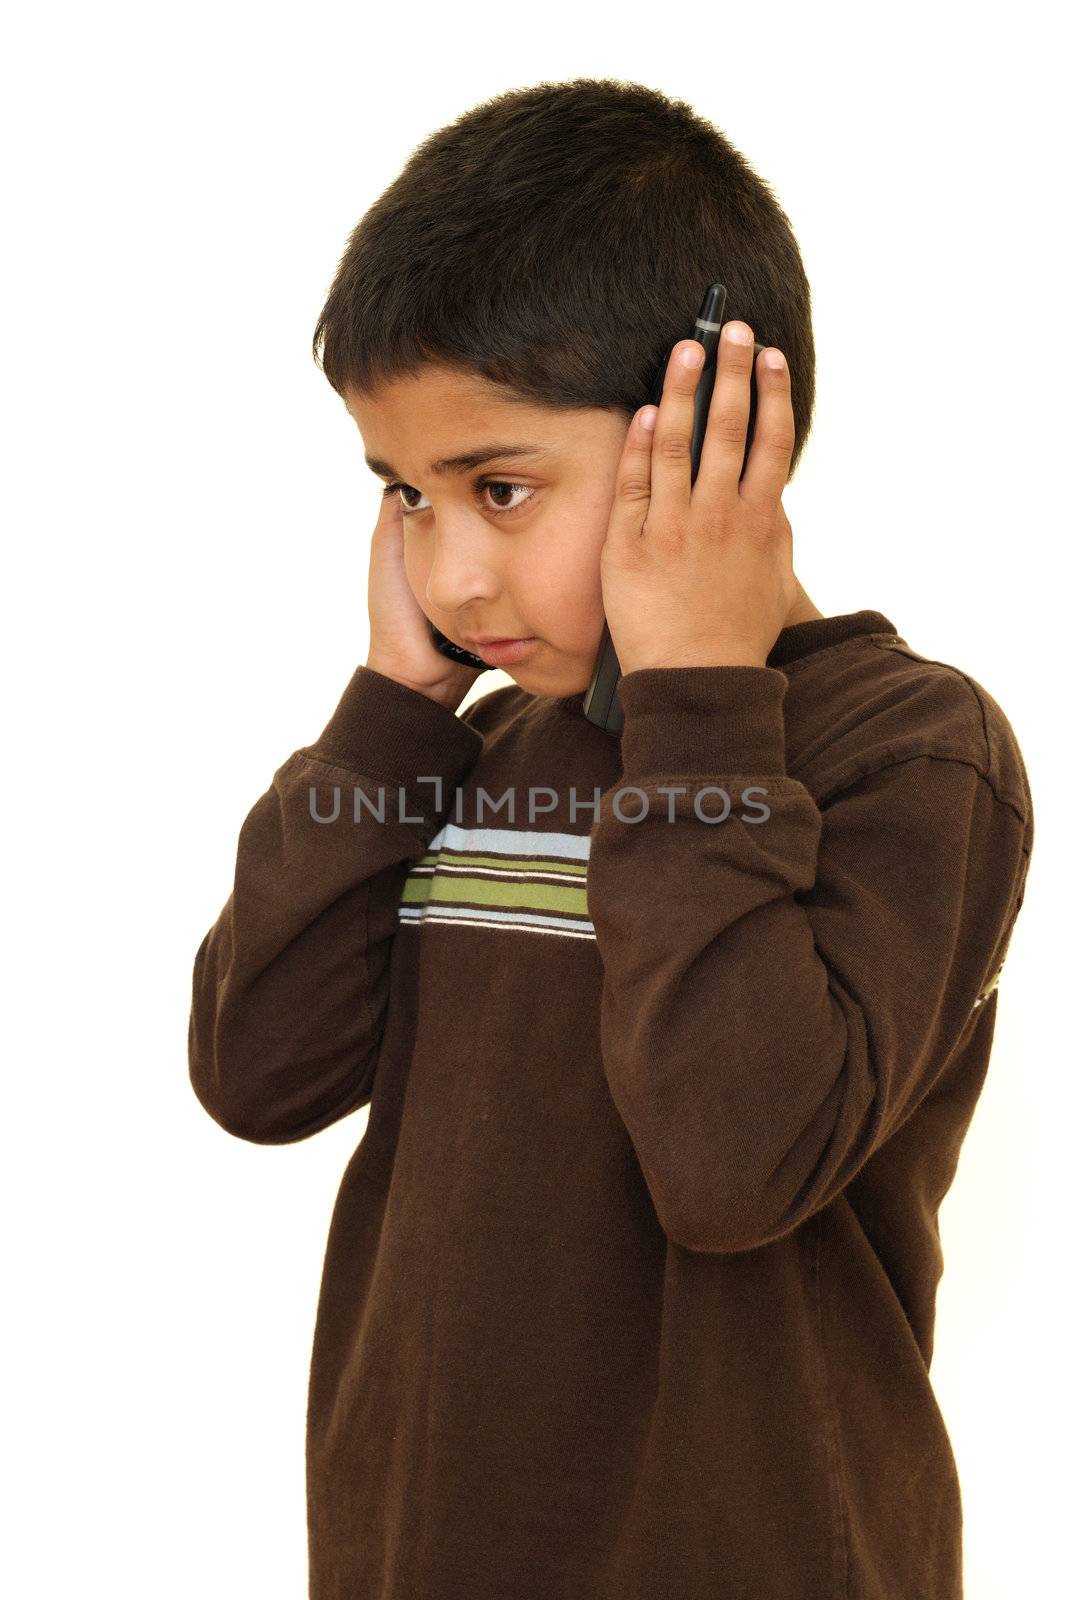 A handsome young boy taking passionately on phone